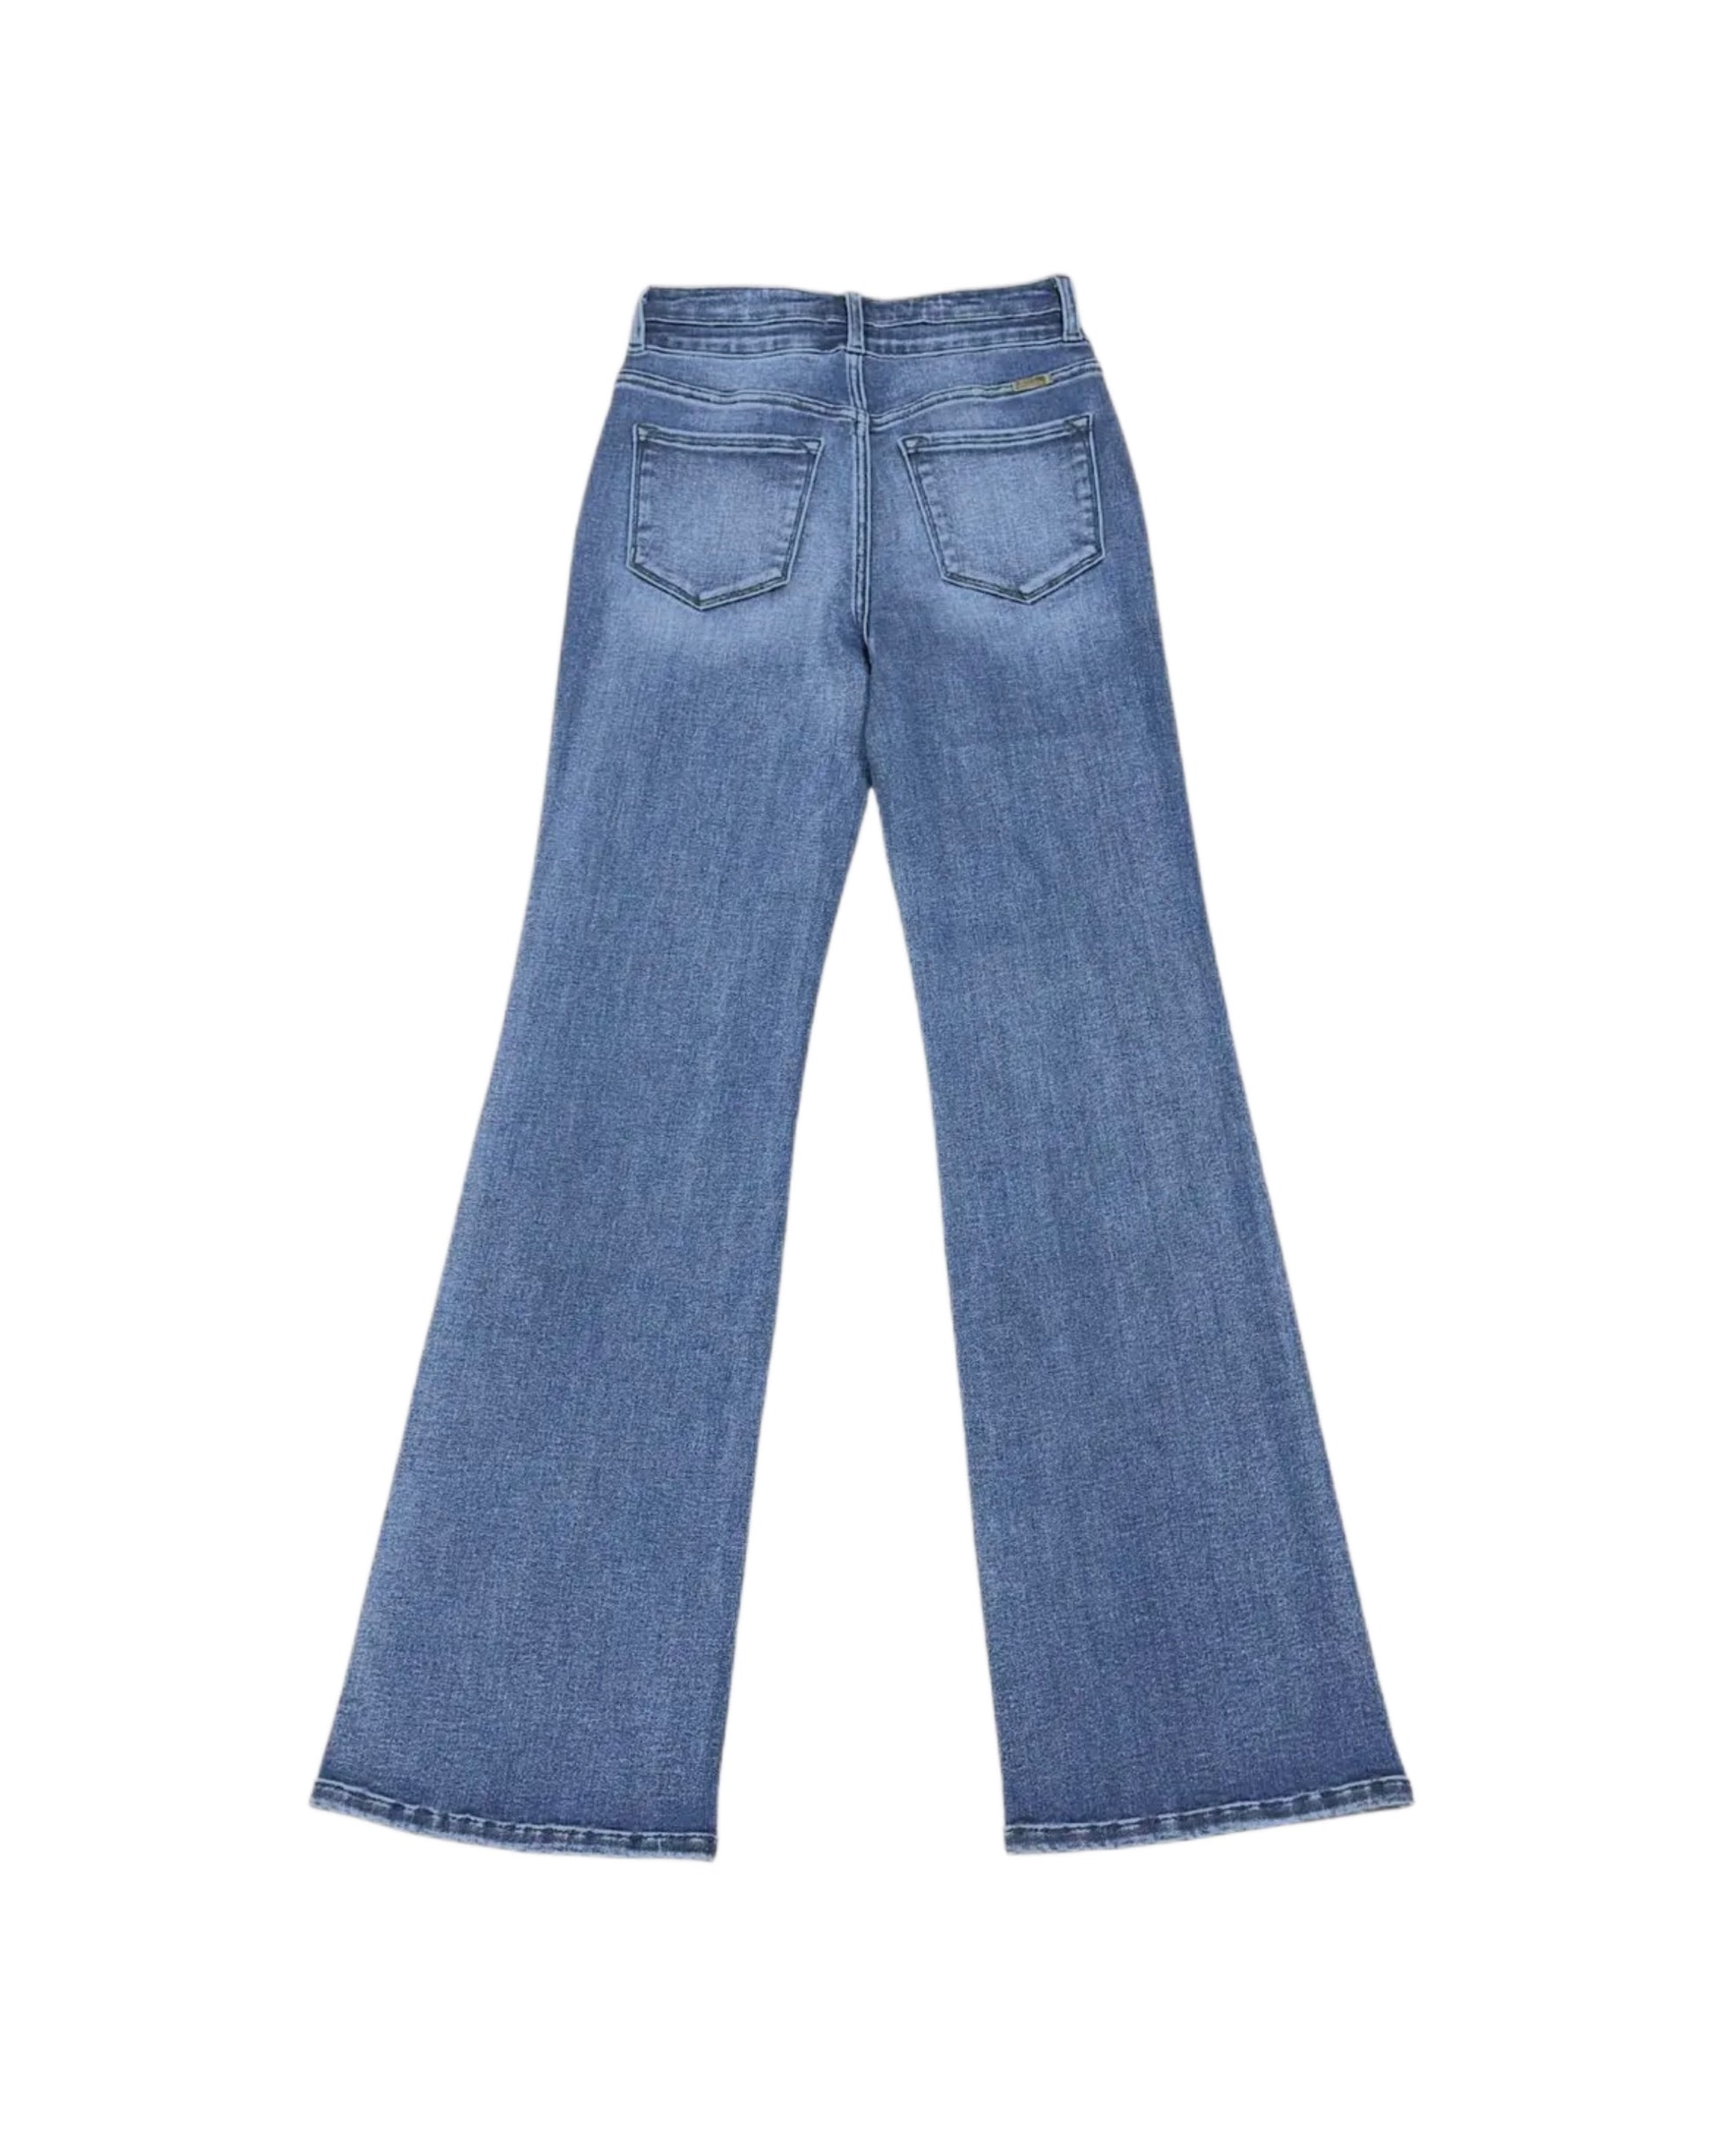 Nashville Flared KanCan Jeans - Imperfectly Perfect Boutique